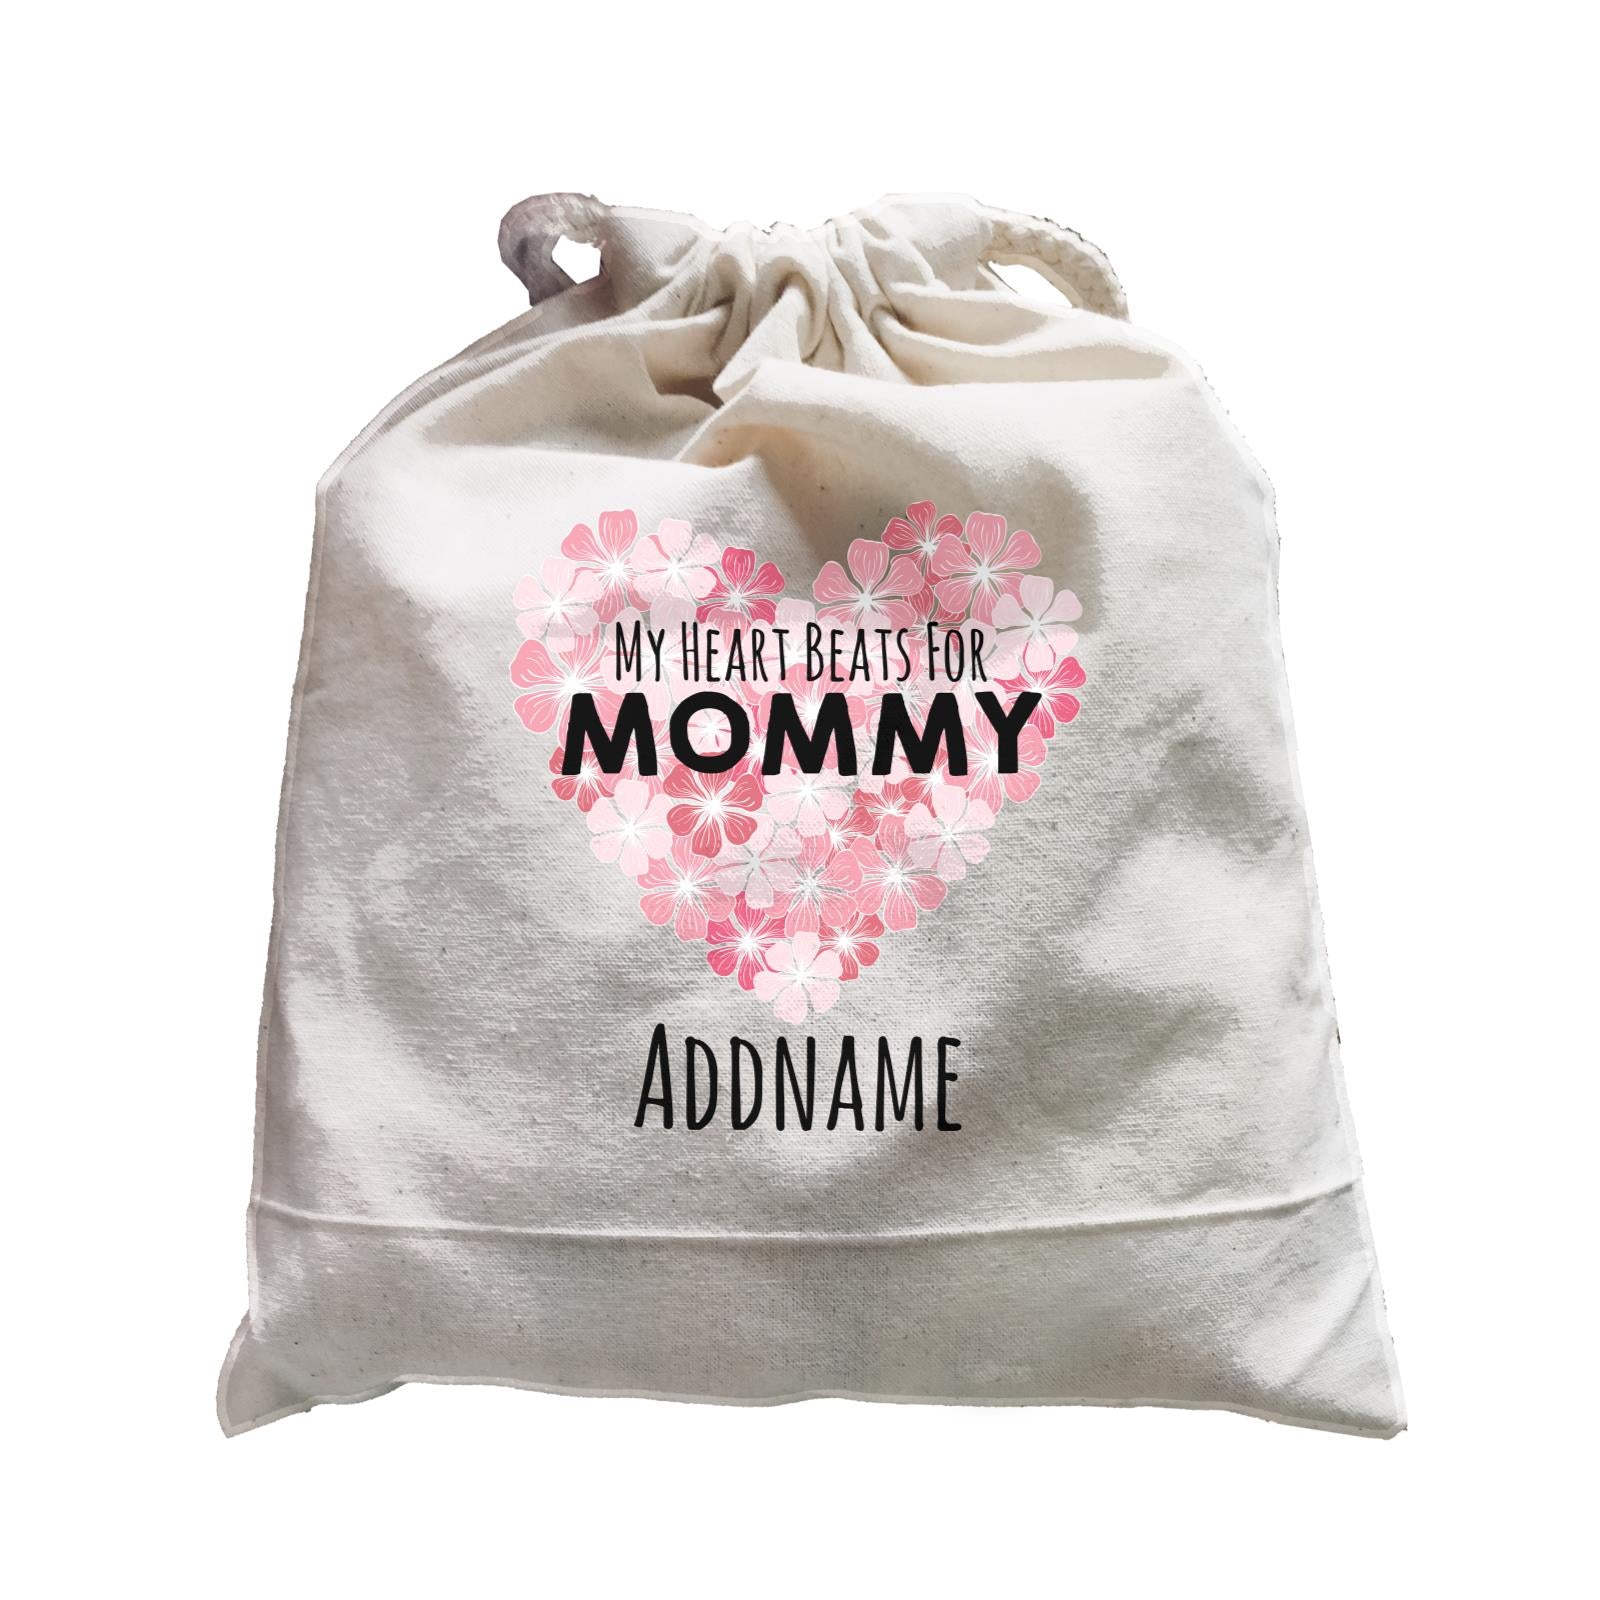 Drawn Mom & Dad Love Heart Beats for Mommy Addname Satchel